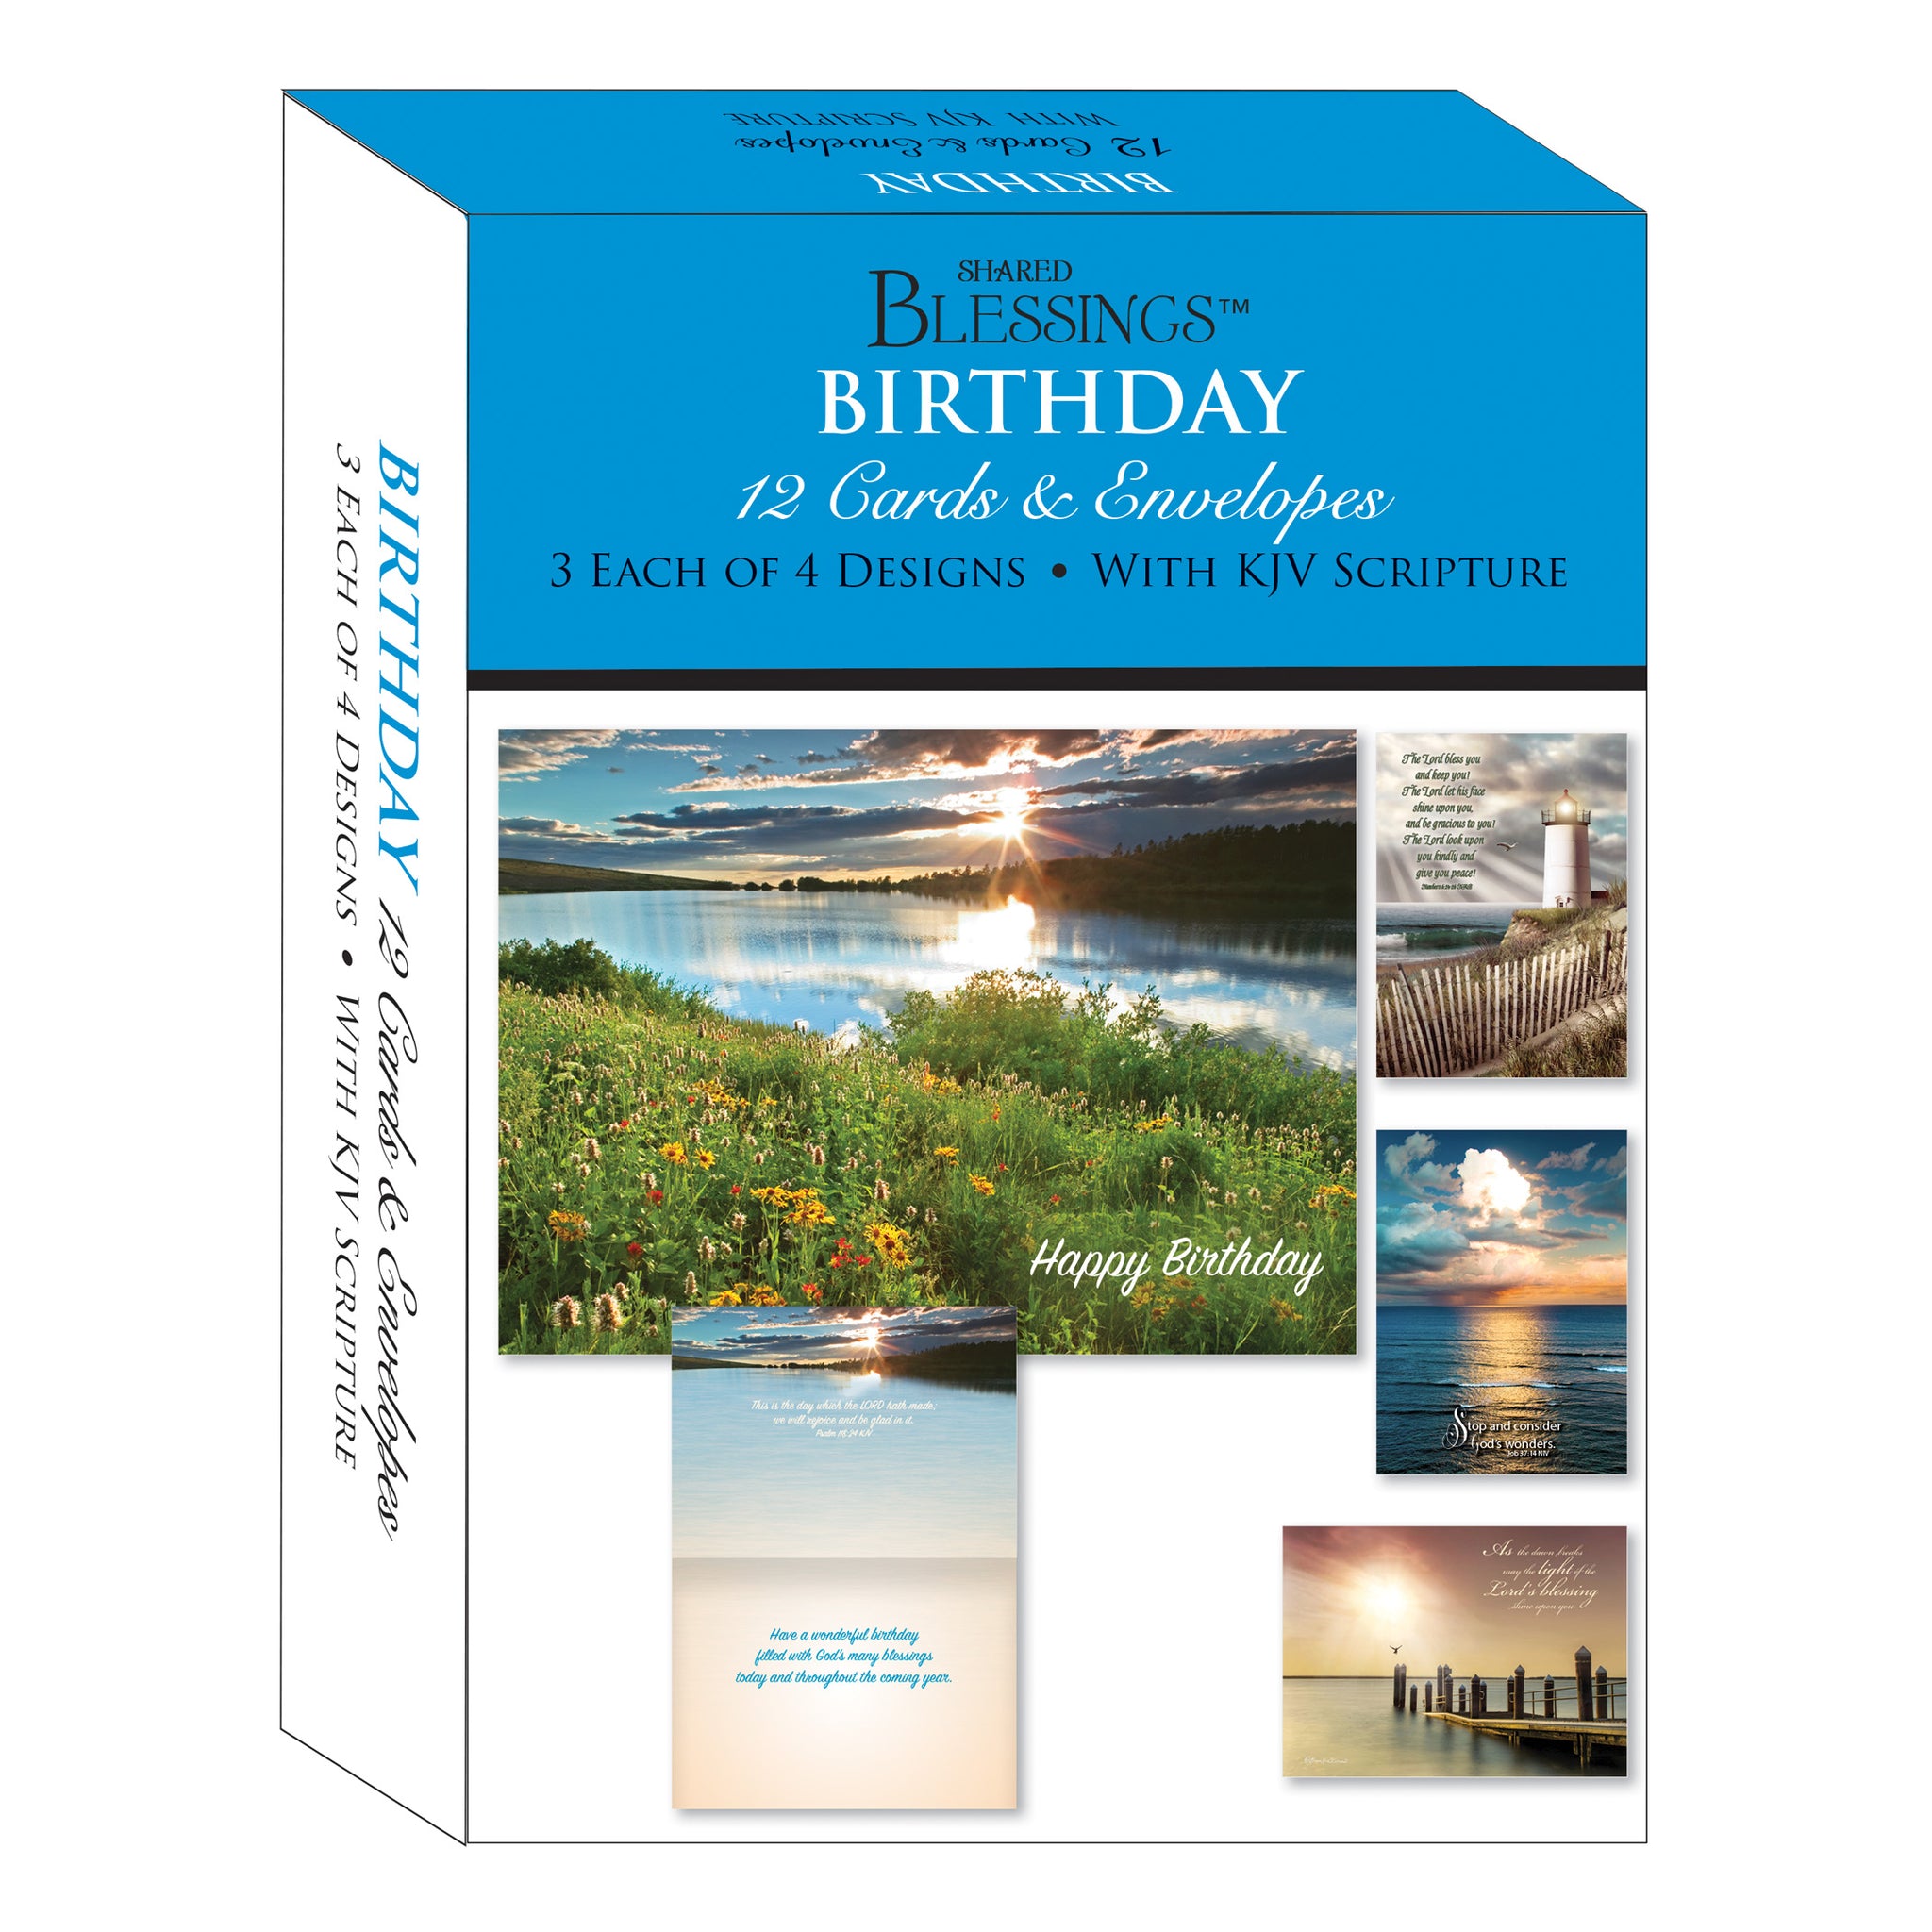 Greeting Card Organizer & Storage Box With 6 Adjustable Dividers For  Holiday Birthday Cards Photos